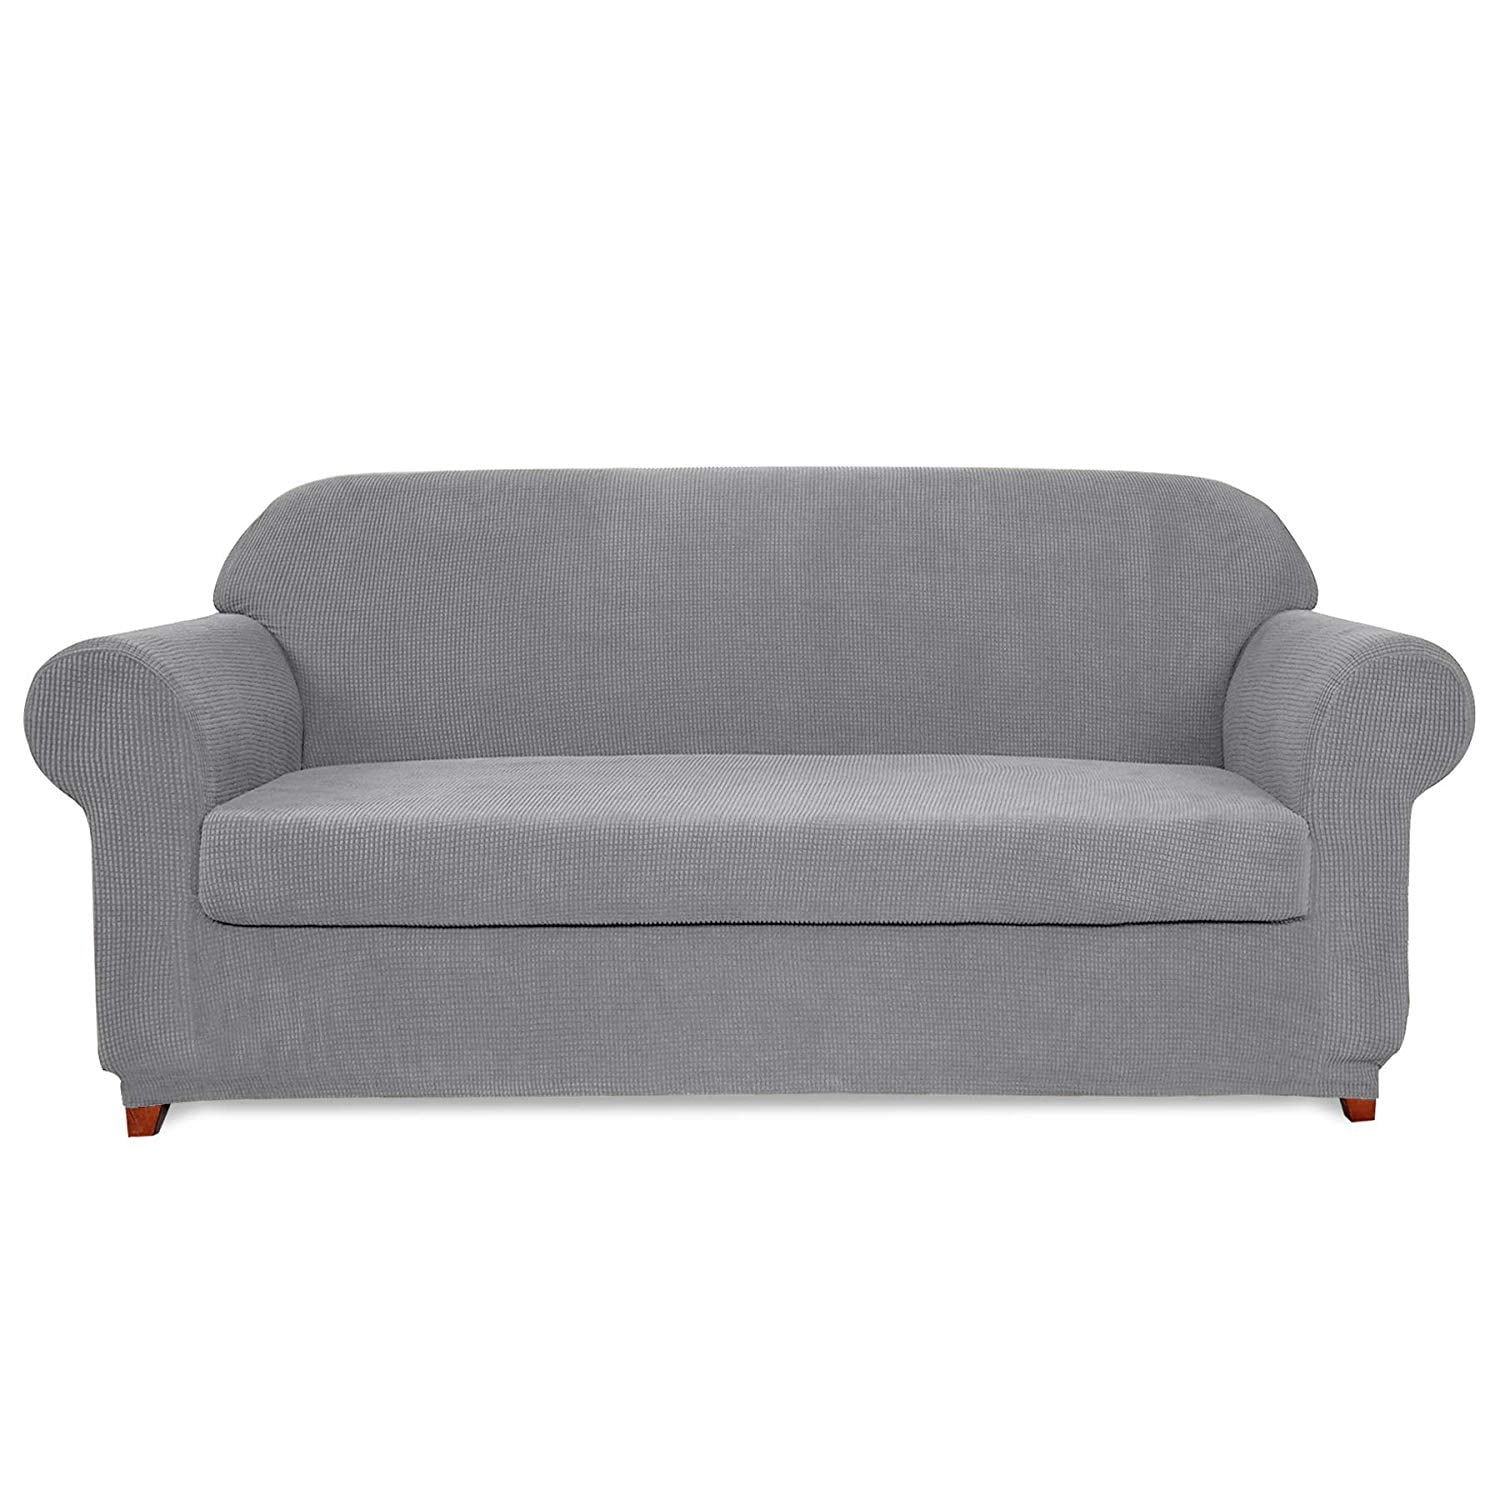 Grey Stretch 2-Seater Sofa Love Seat Cover Settee Couch Slipcover Protector 